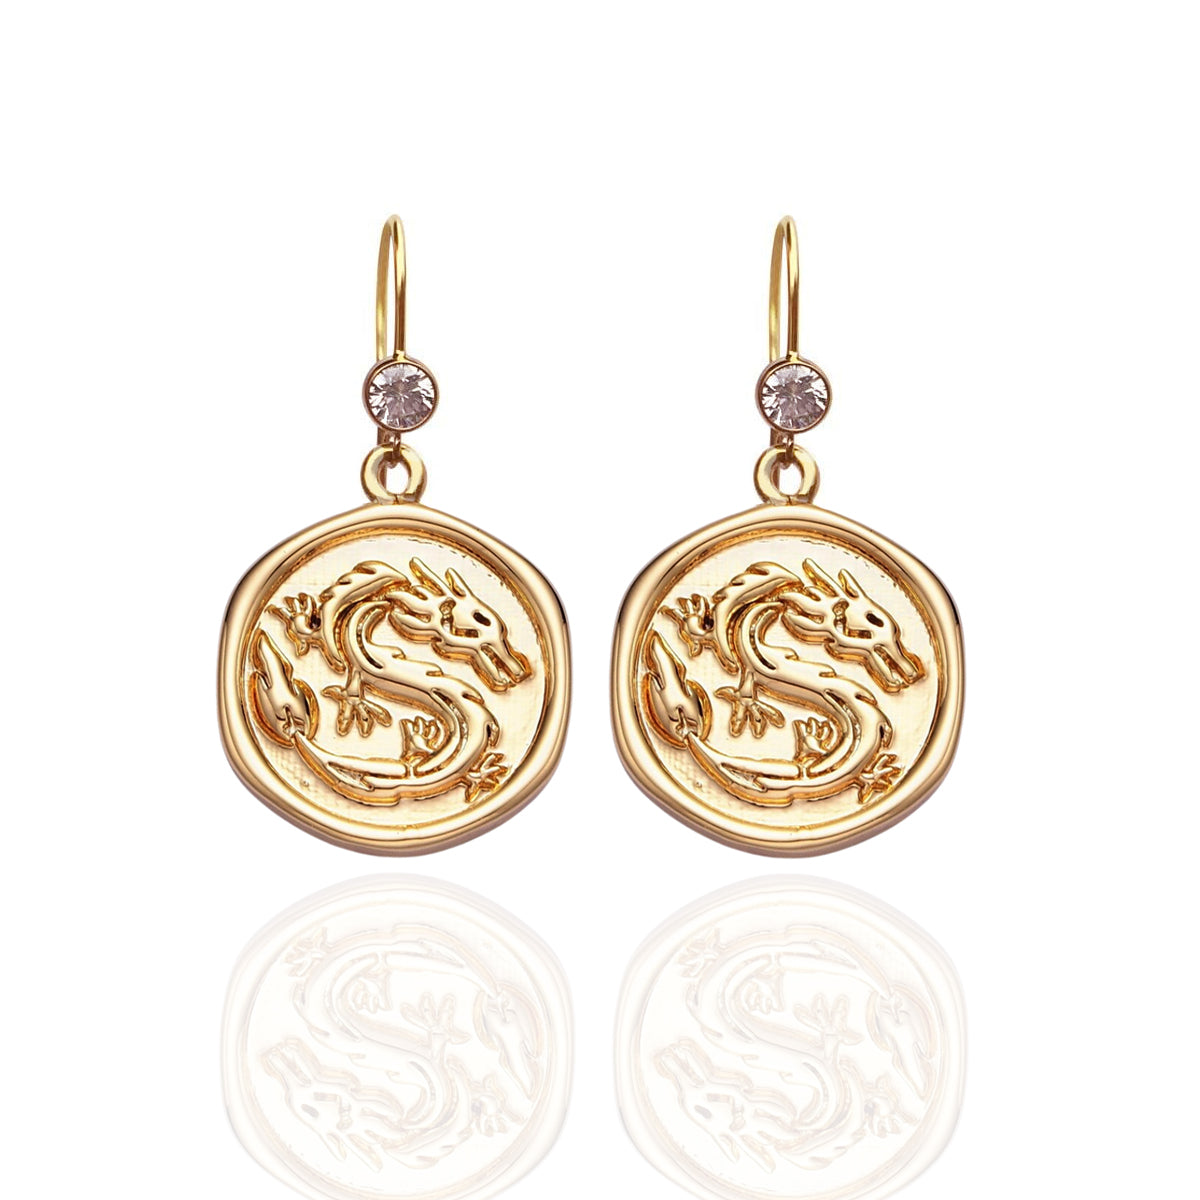 Celebrate 2024 - the Year of the Dragon with the Strength of the Dragon Earrings, a testament to valor and bravery. 